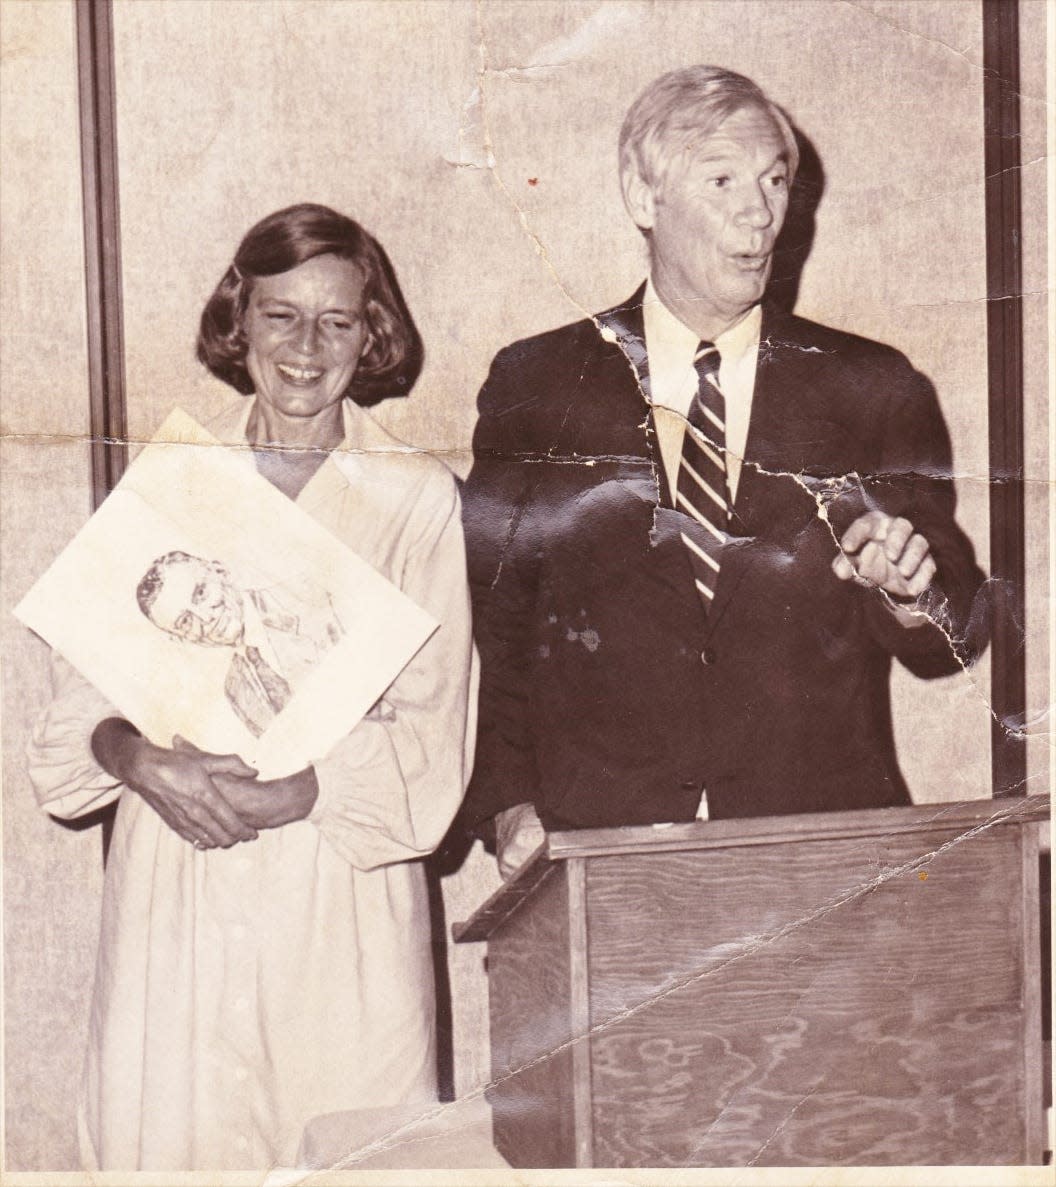 Betty and husband, the late Herald publisher Sam D. Kennedy, are pictured at a Tennessee Press Association Convention in 1979 when Mr. Kennedy was named president of the Tennessee Press Association. Mrs. Kennedy holds a picture of her late father, John W. Finney, who, like Kennedy, was president of the association, publisher and owner of the Herald and named to the Newspaper Hall of Fame.